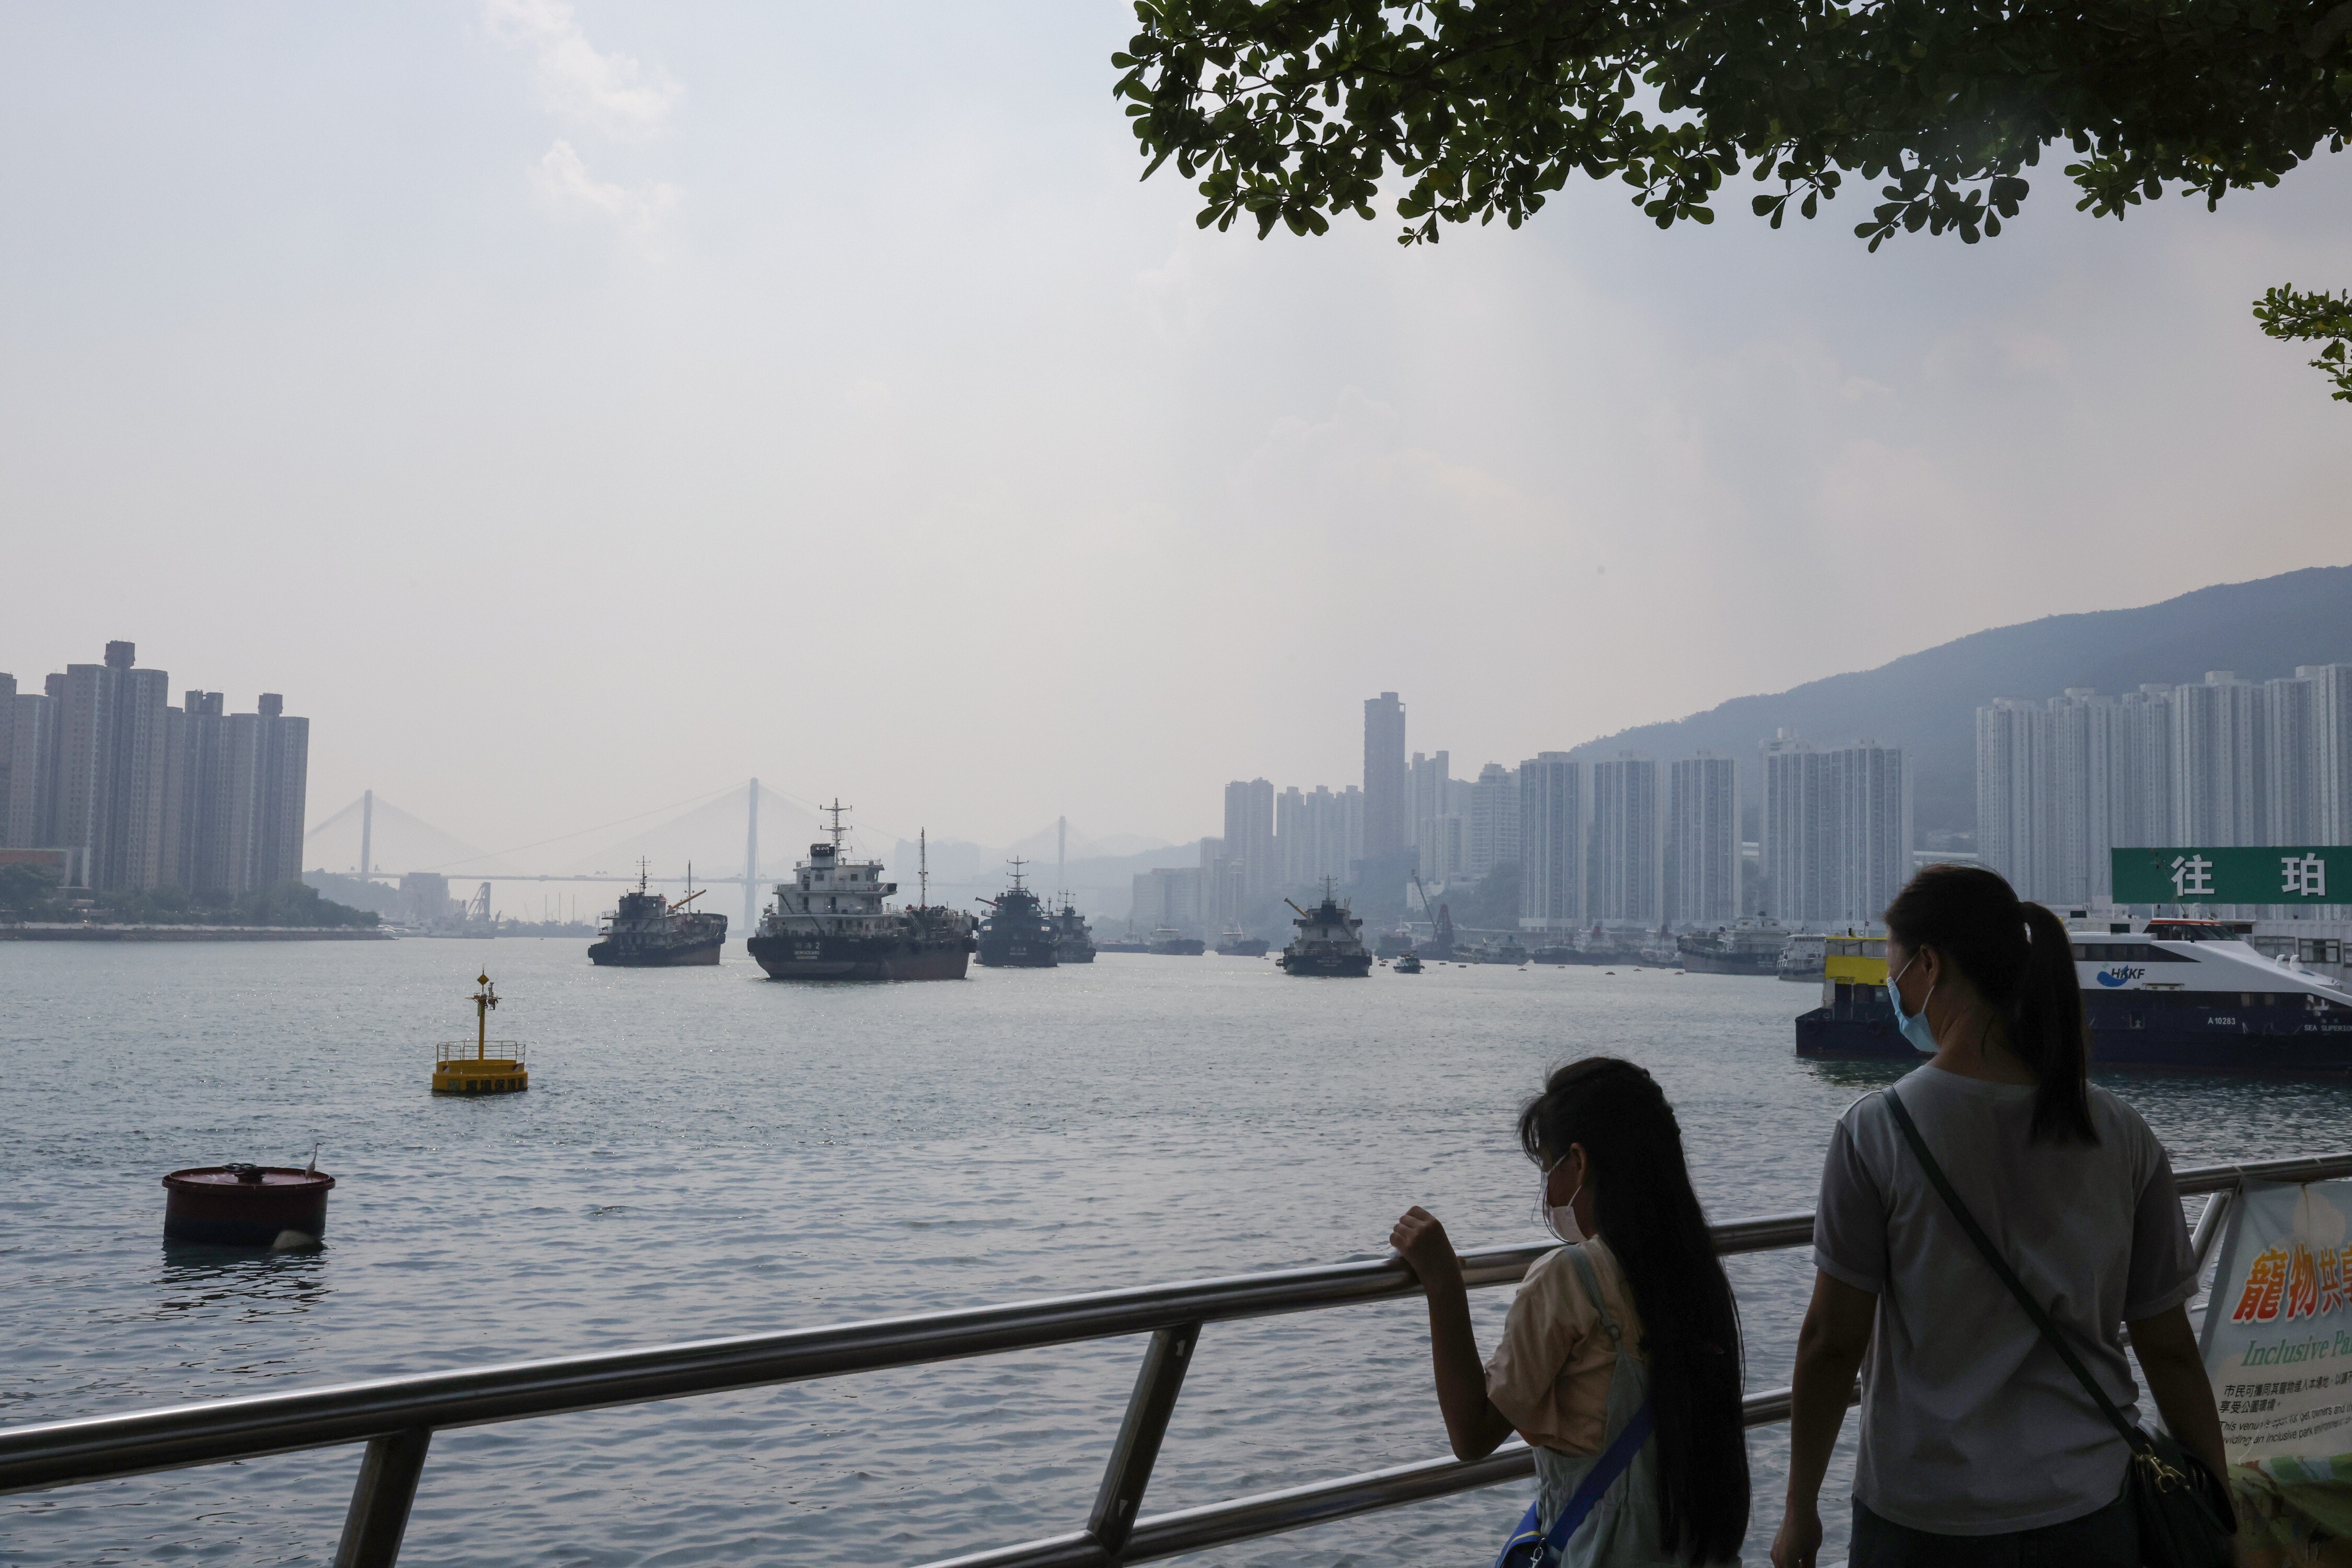 Tsuen Wan and other parts of Hong Kong are experiencing high levels of pollution. Photo: K. Y. Cheng